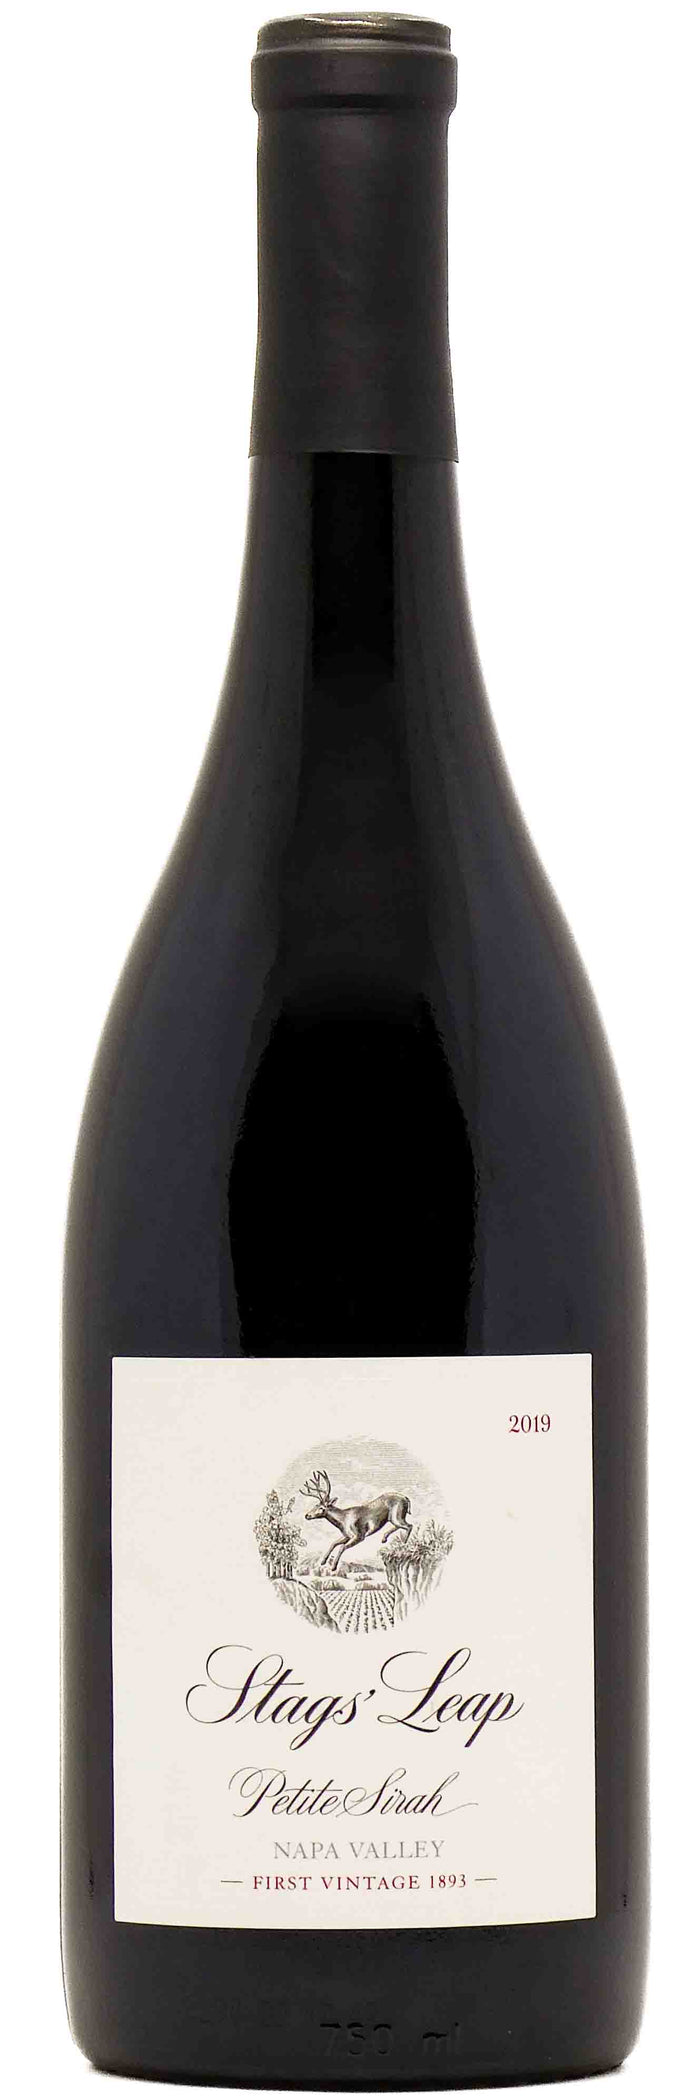 Stags' Leap Winery Petite Sirah 2019